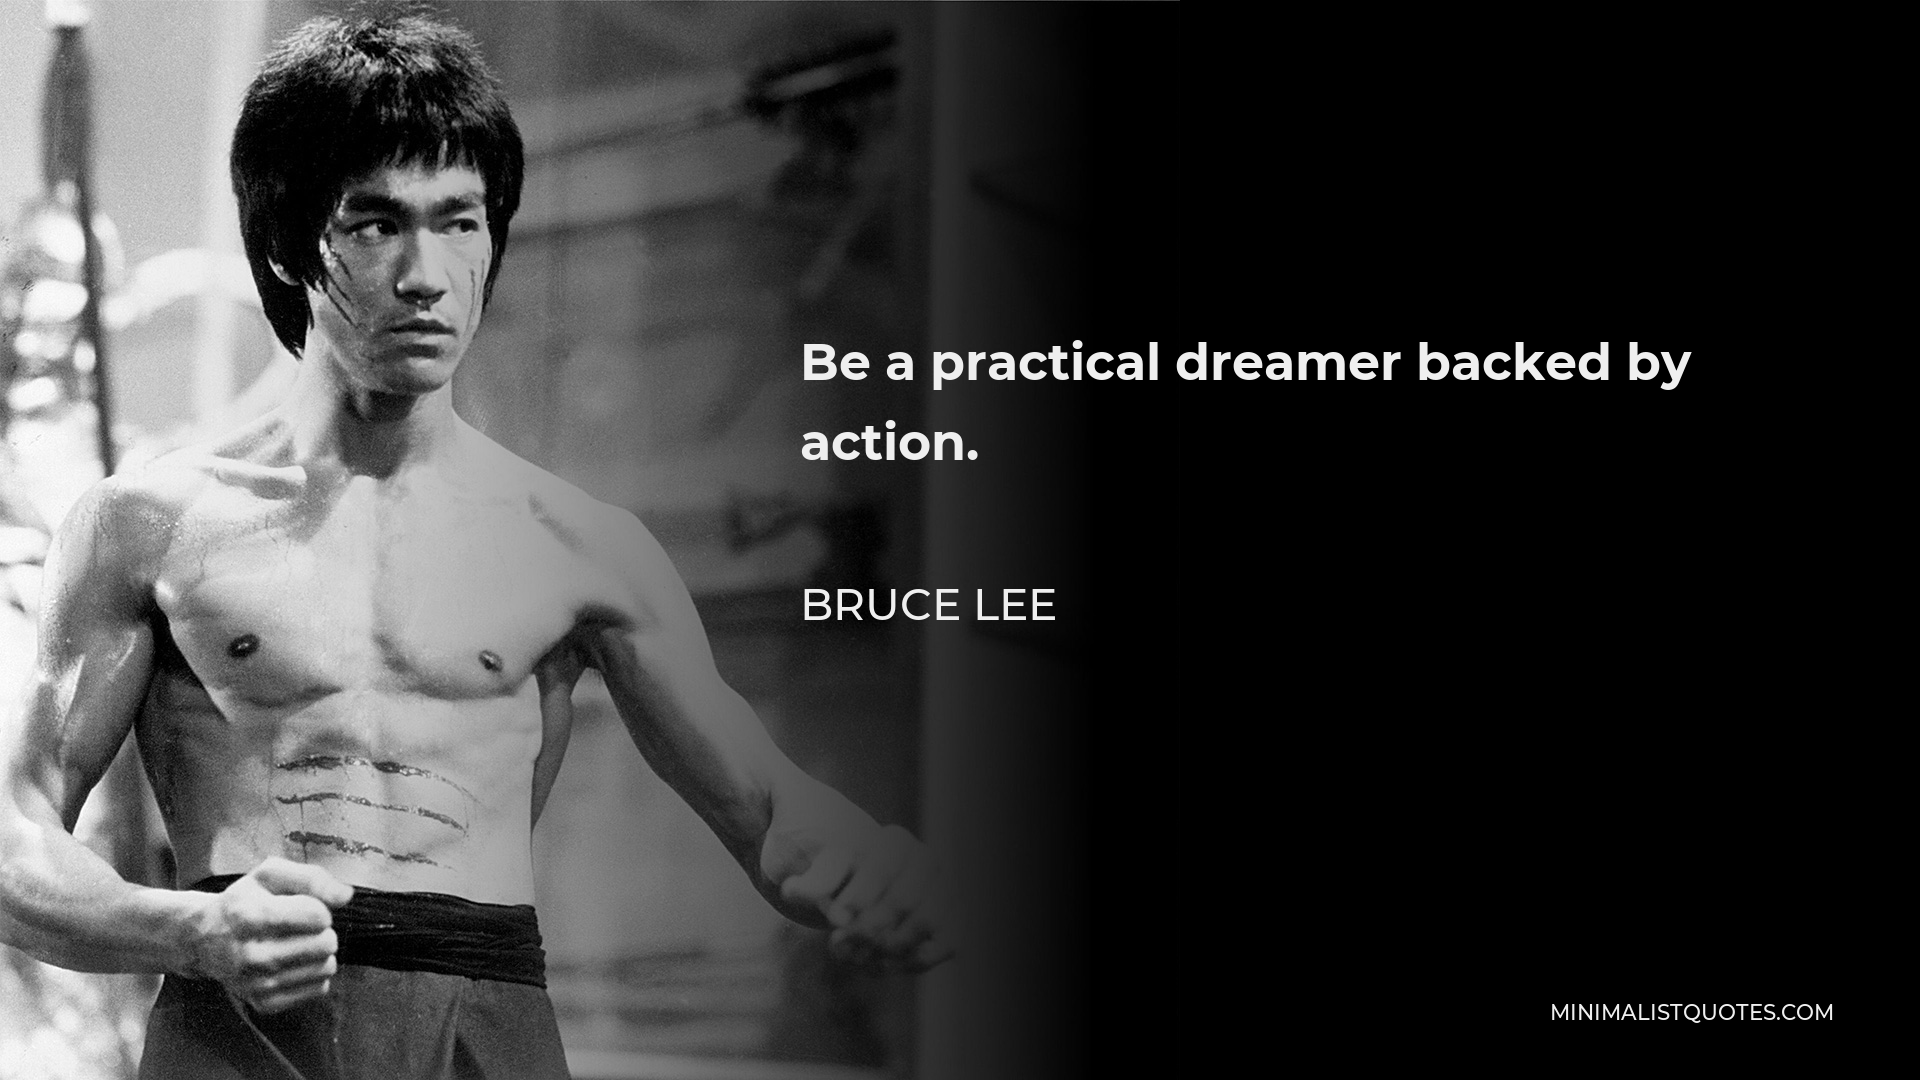 Bruce Lee Quote - Be a practical dreamer backed by action.